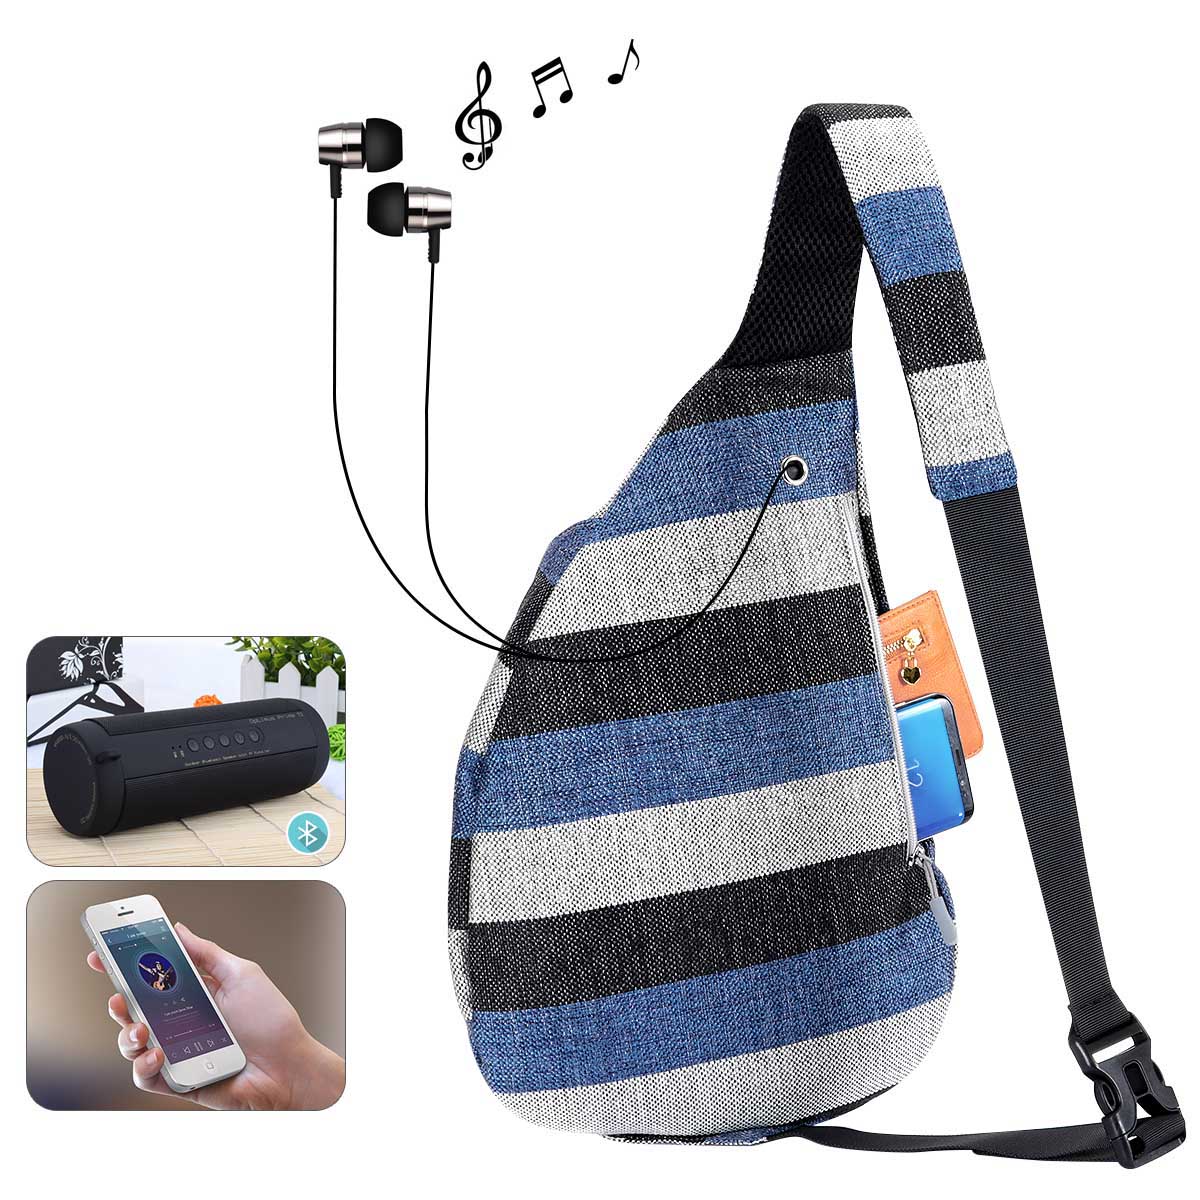 HAWEE Backpack for Women Hiking Backpack Chest Sling Bag Sports Travel Crossbody Daypack, Wide Stripes of Black/ Blue/Gray - image 2 of 7